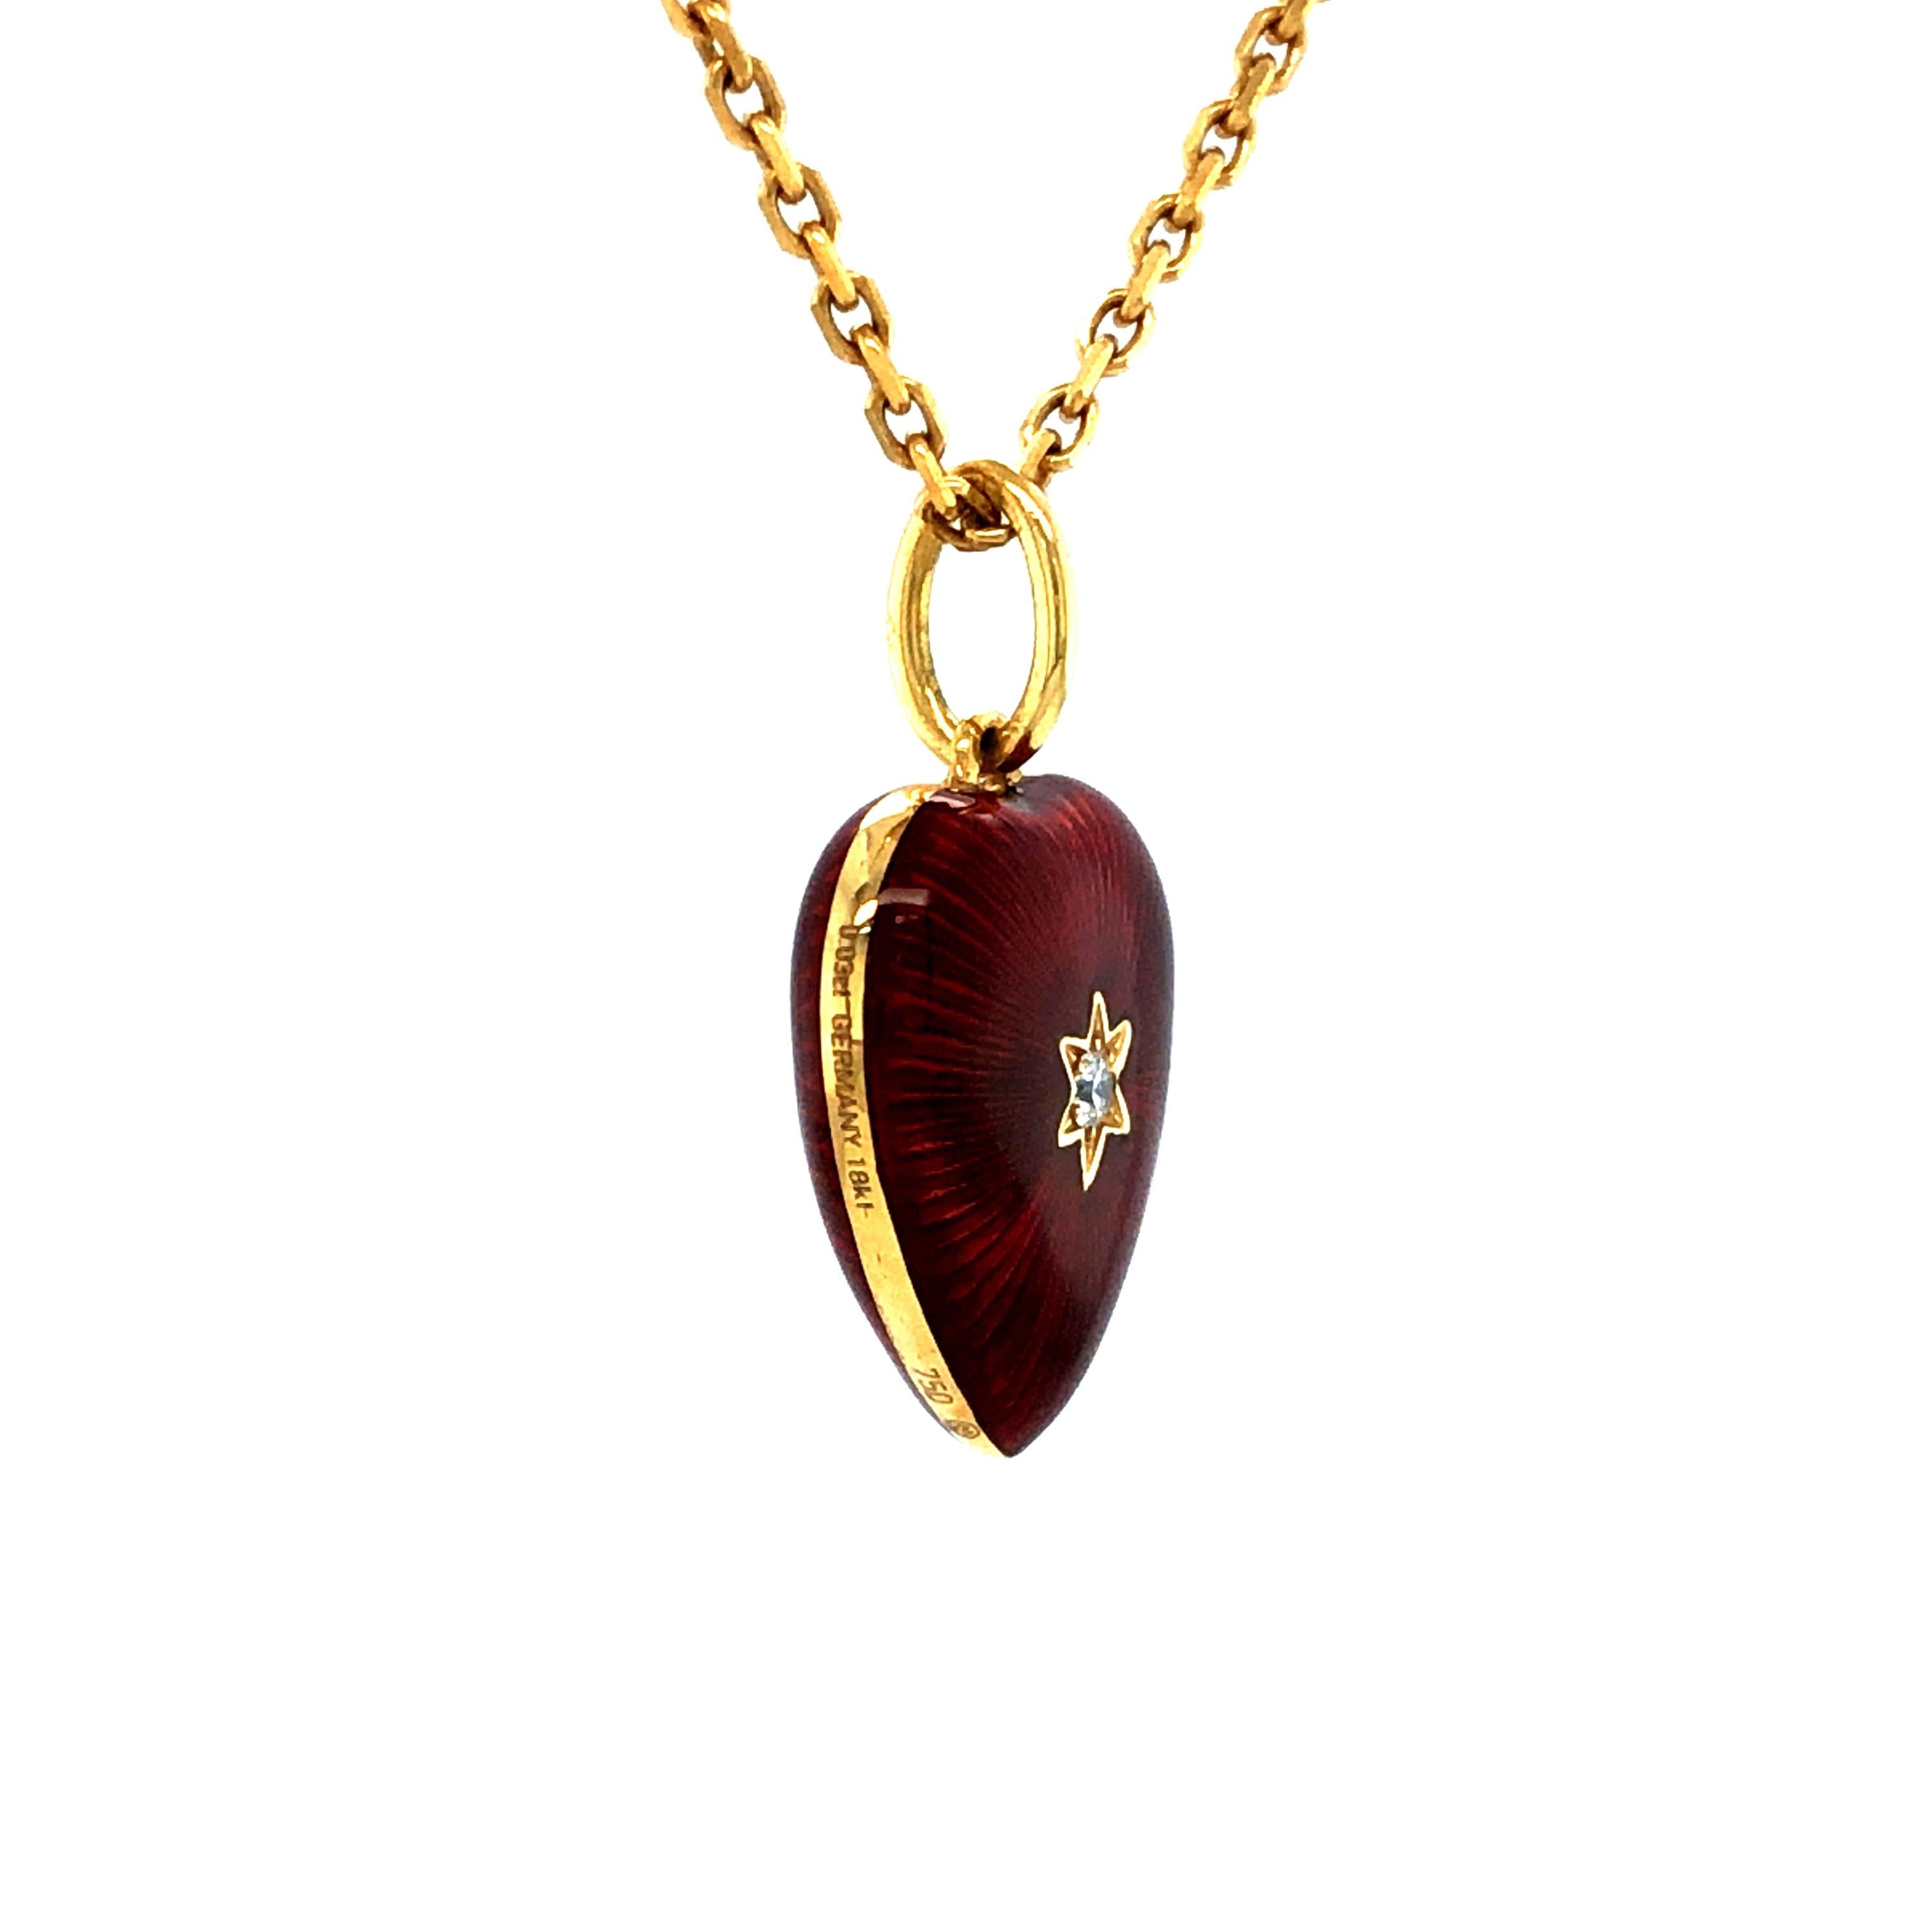 Victor Mayer heart pendant necklace with star 18k yellow gold, Hallmark Collection, red vitreous enamel, 2 diamonds, total 0.03 ct, G VS brilliant cut

About the creator Victor Mayer
Victor Mayer is internationally renowned for elegant timeless